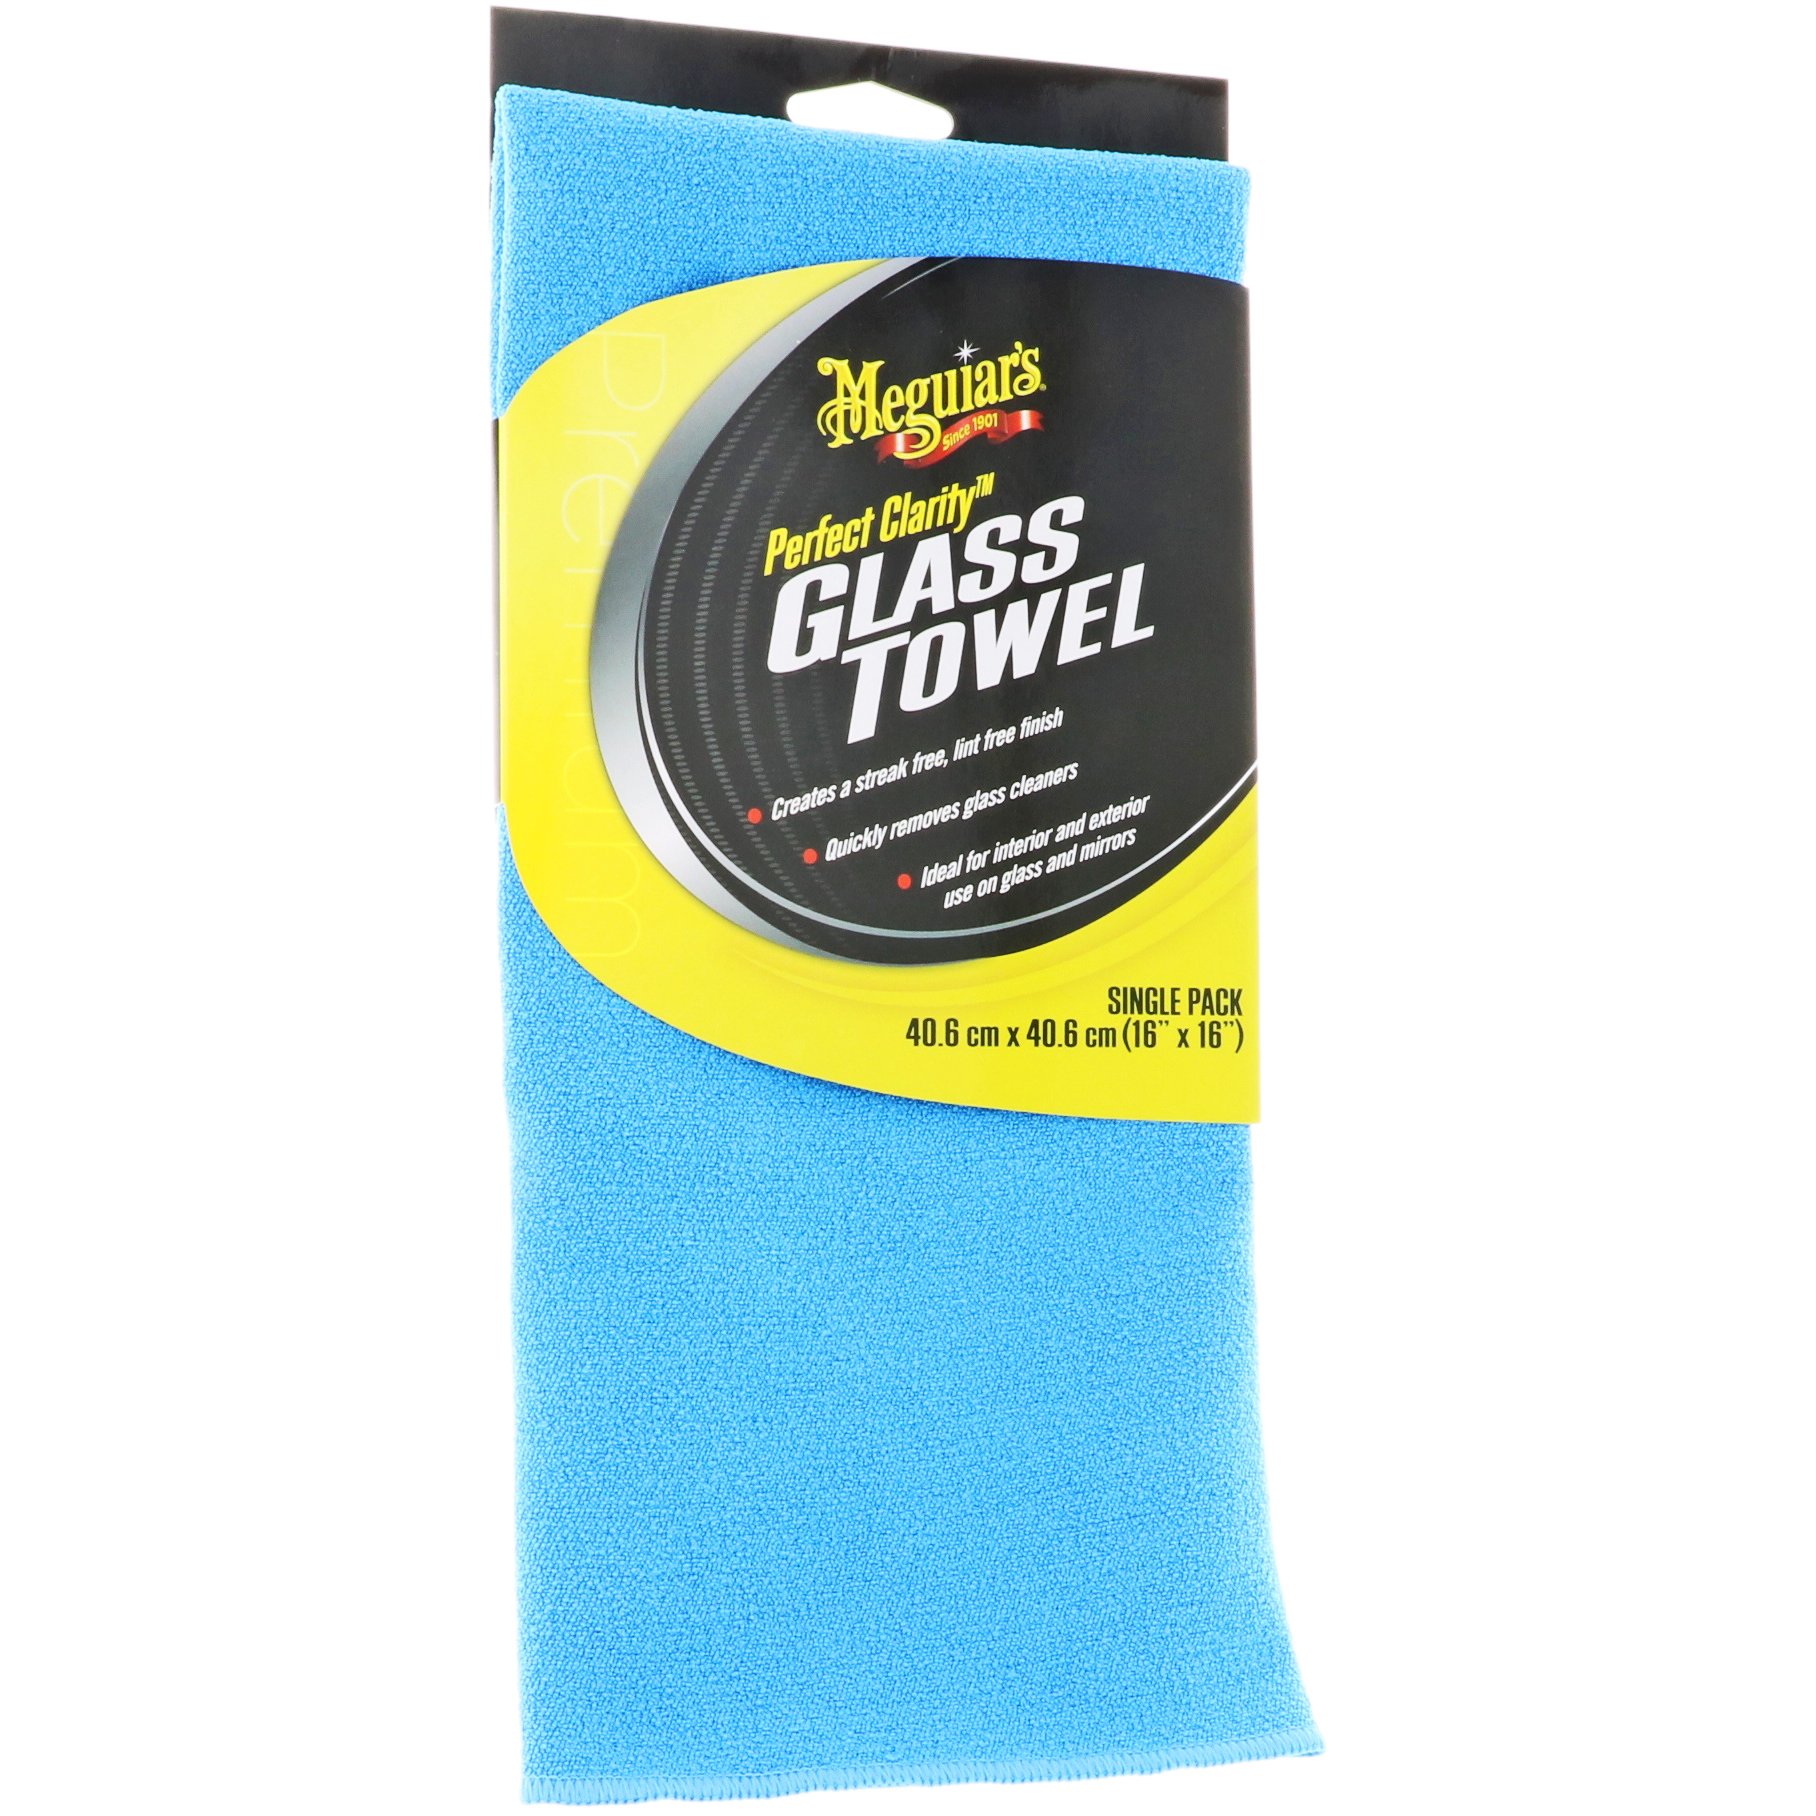 Image of Meguiars Perfect Clarity Glass Towel